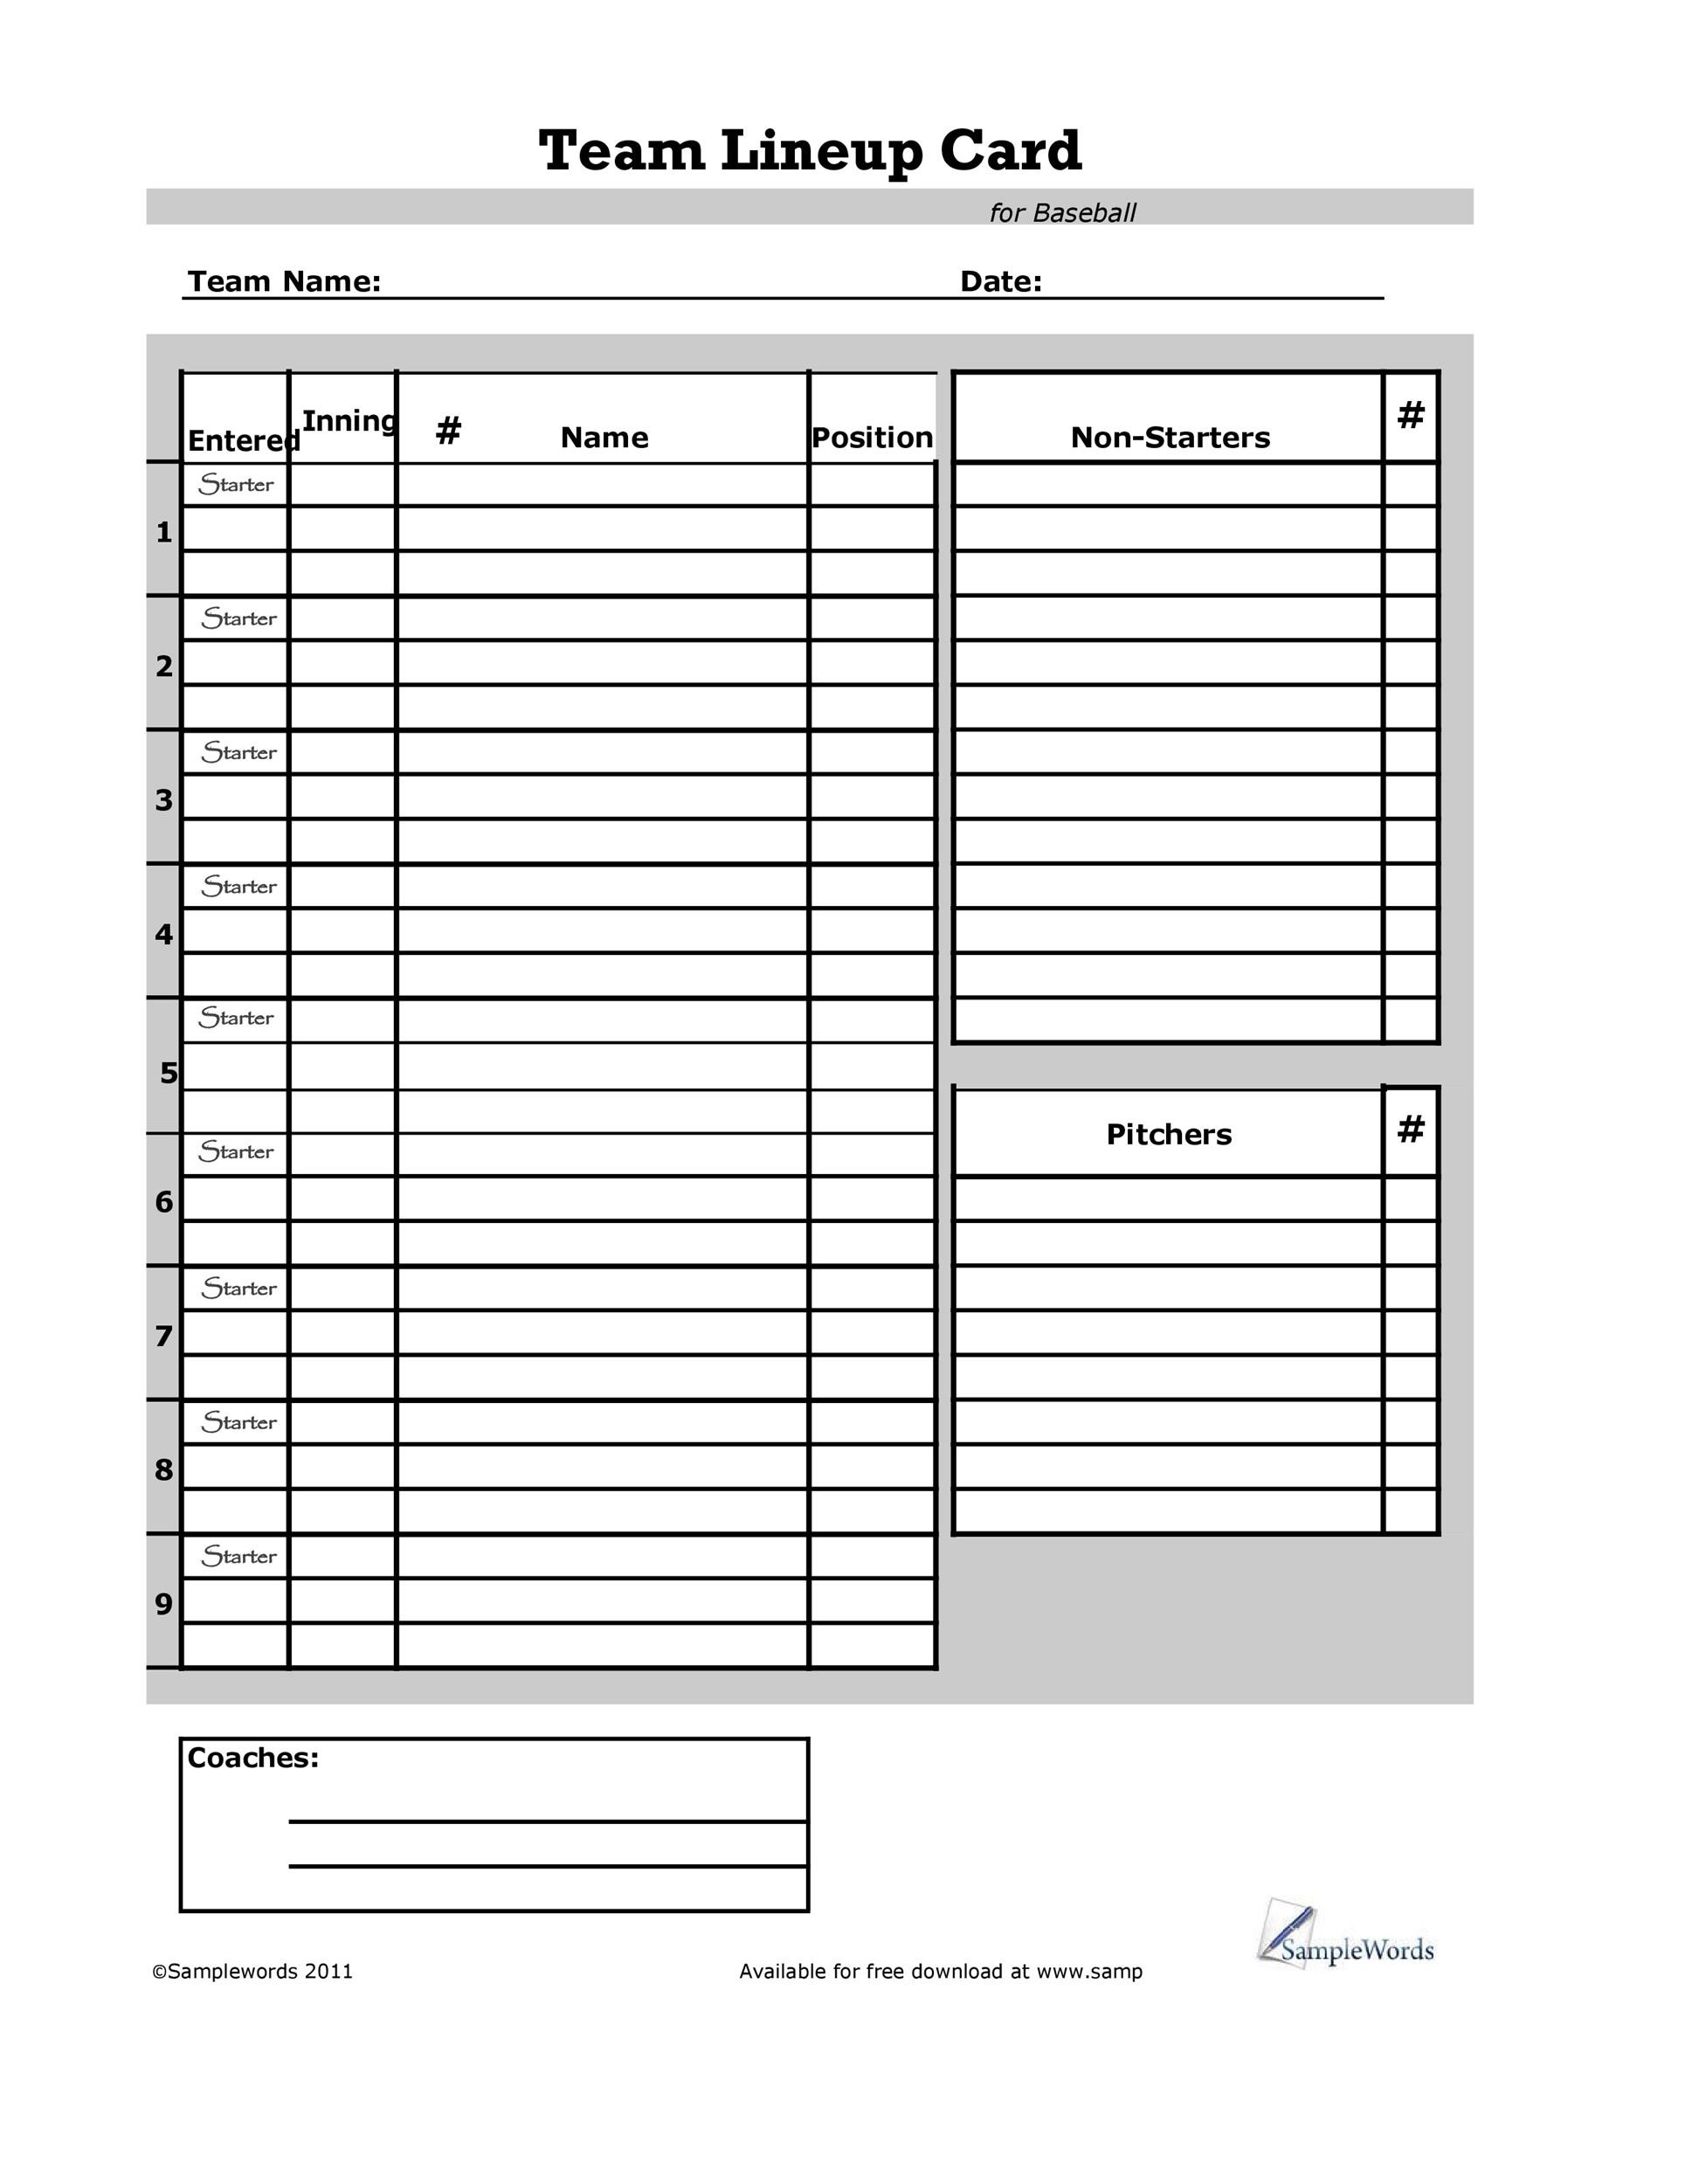 View 24 Inning Baseball Lineup Template Background : Fill, Sign And With Free Baseball Lineup Card Template